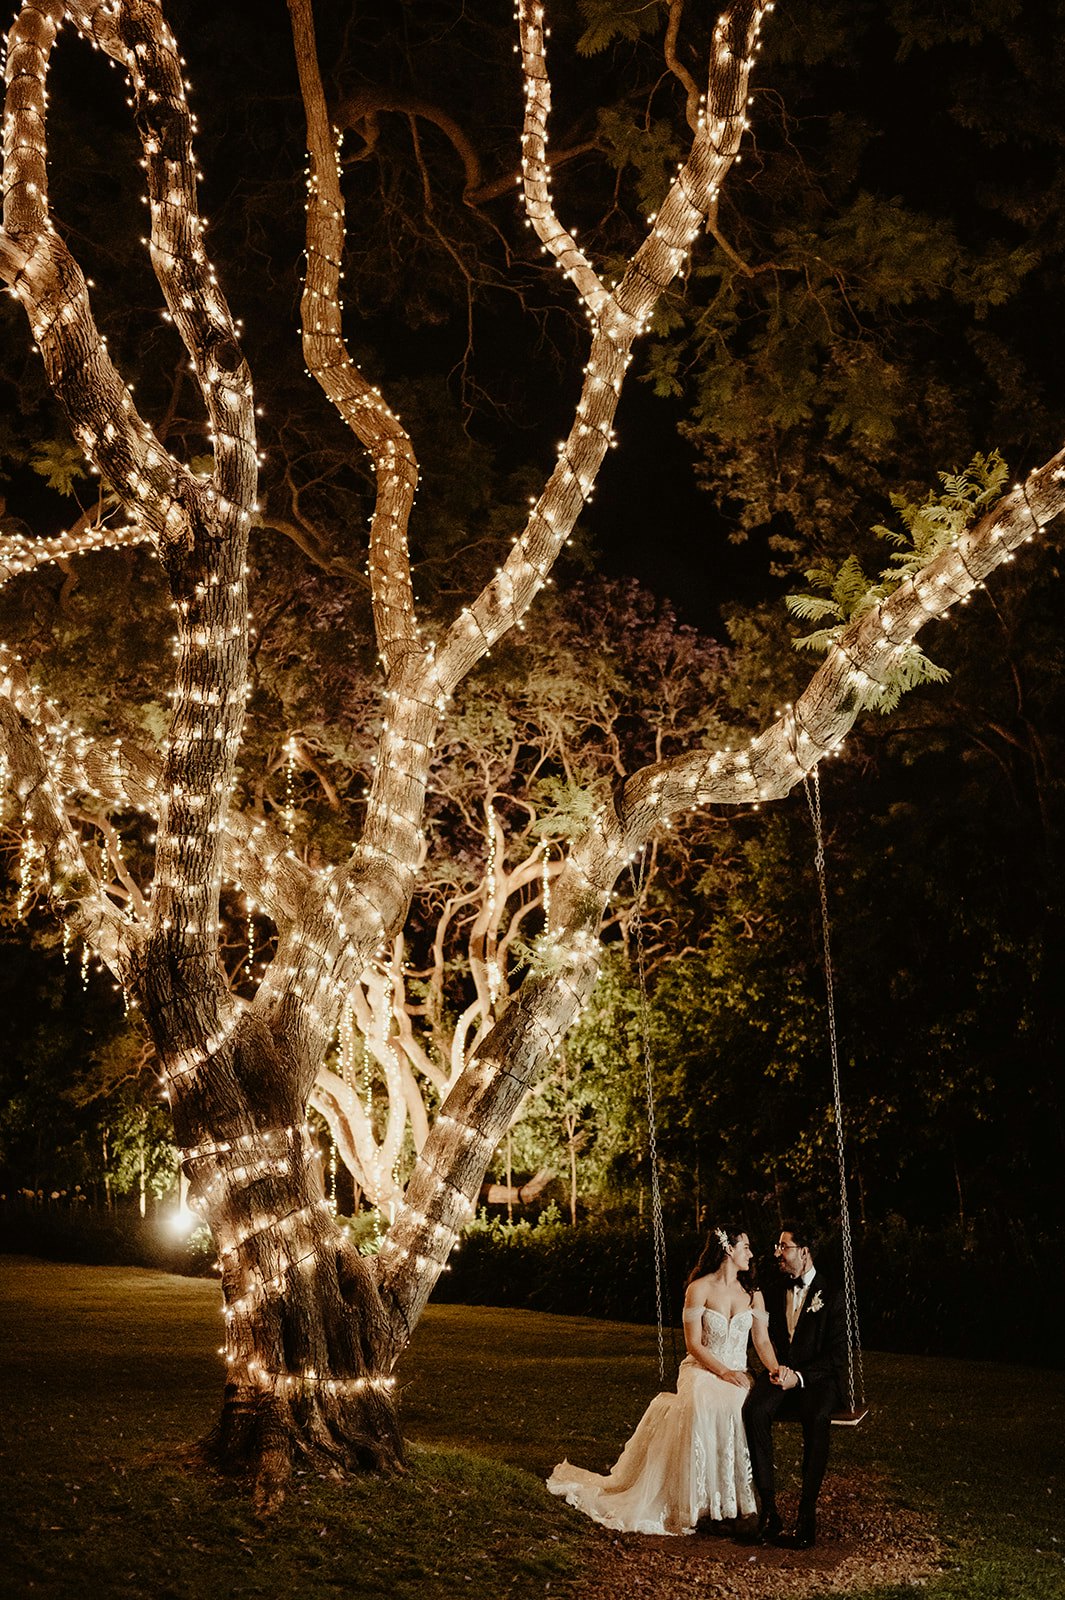 Bride and groom on swing at night